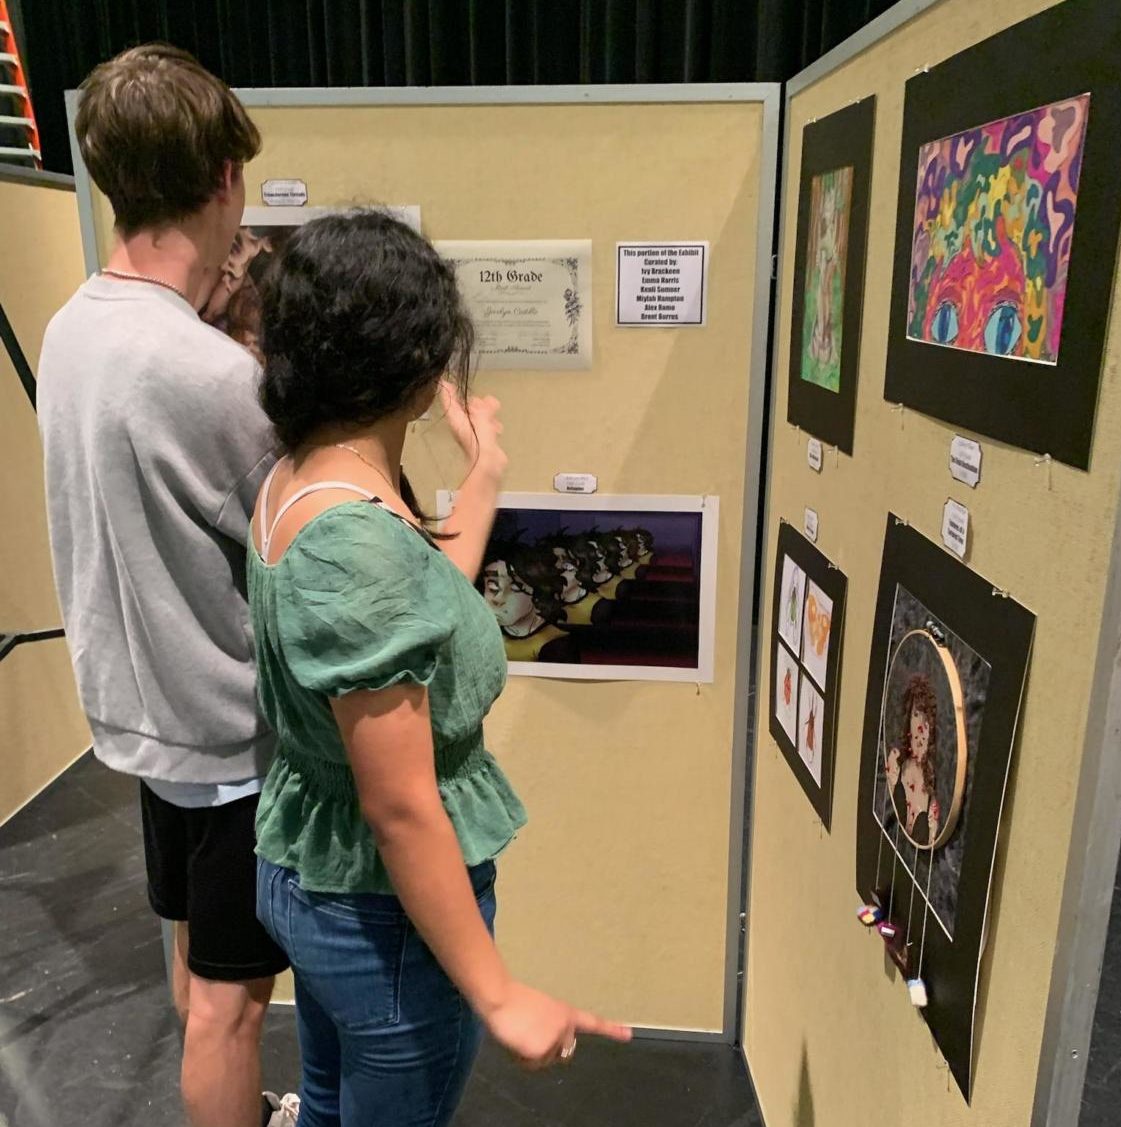 Student Art Displayed in Showcase